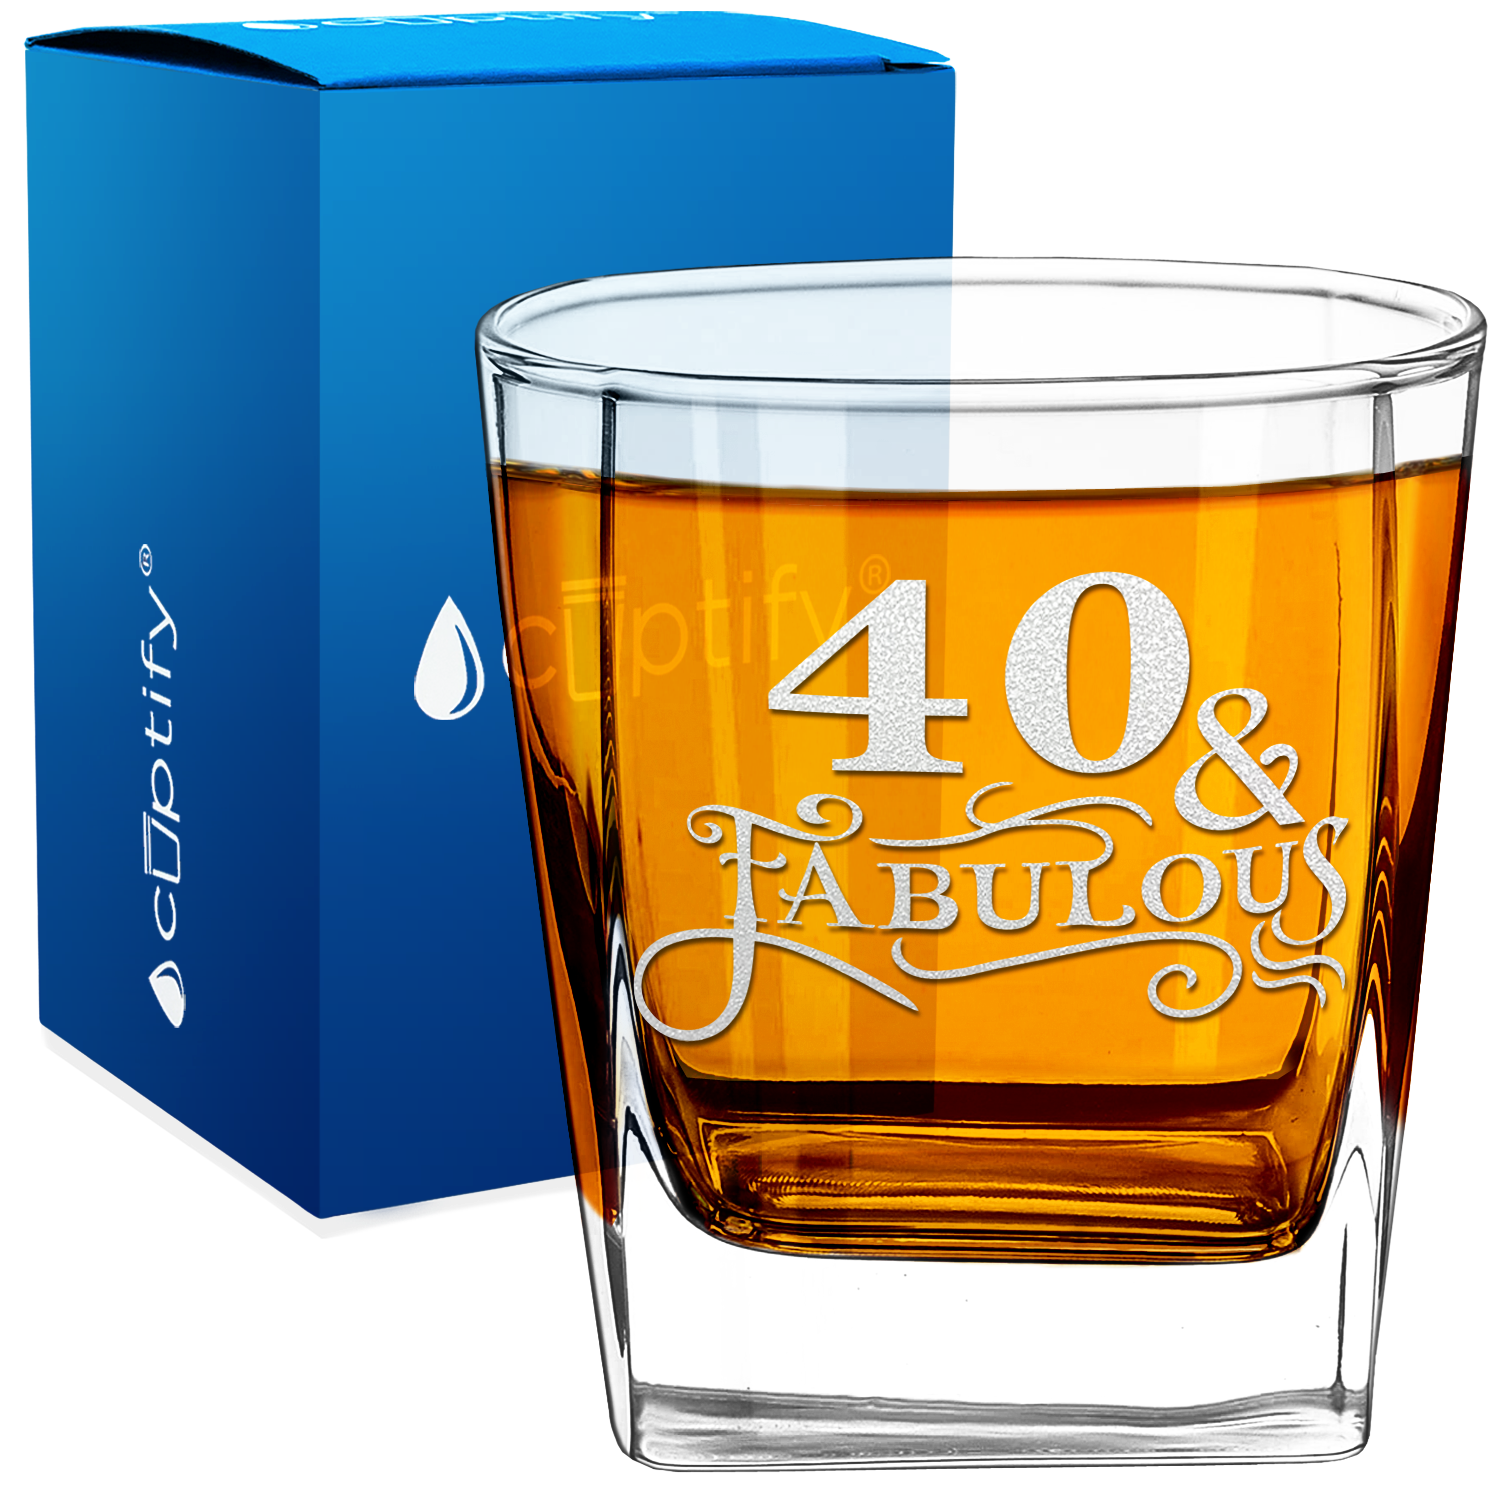 40 & Fabulous 12oz Double Old Fashioned Glass